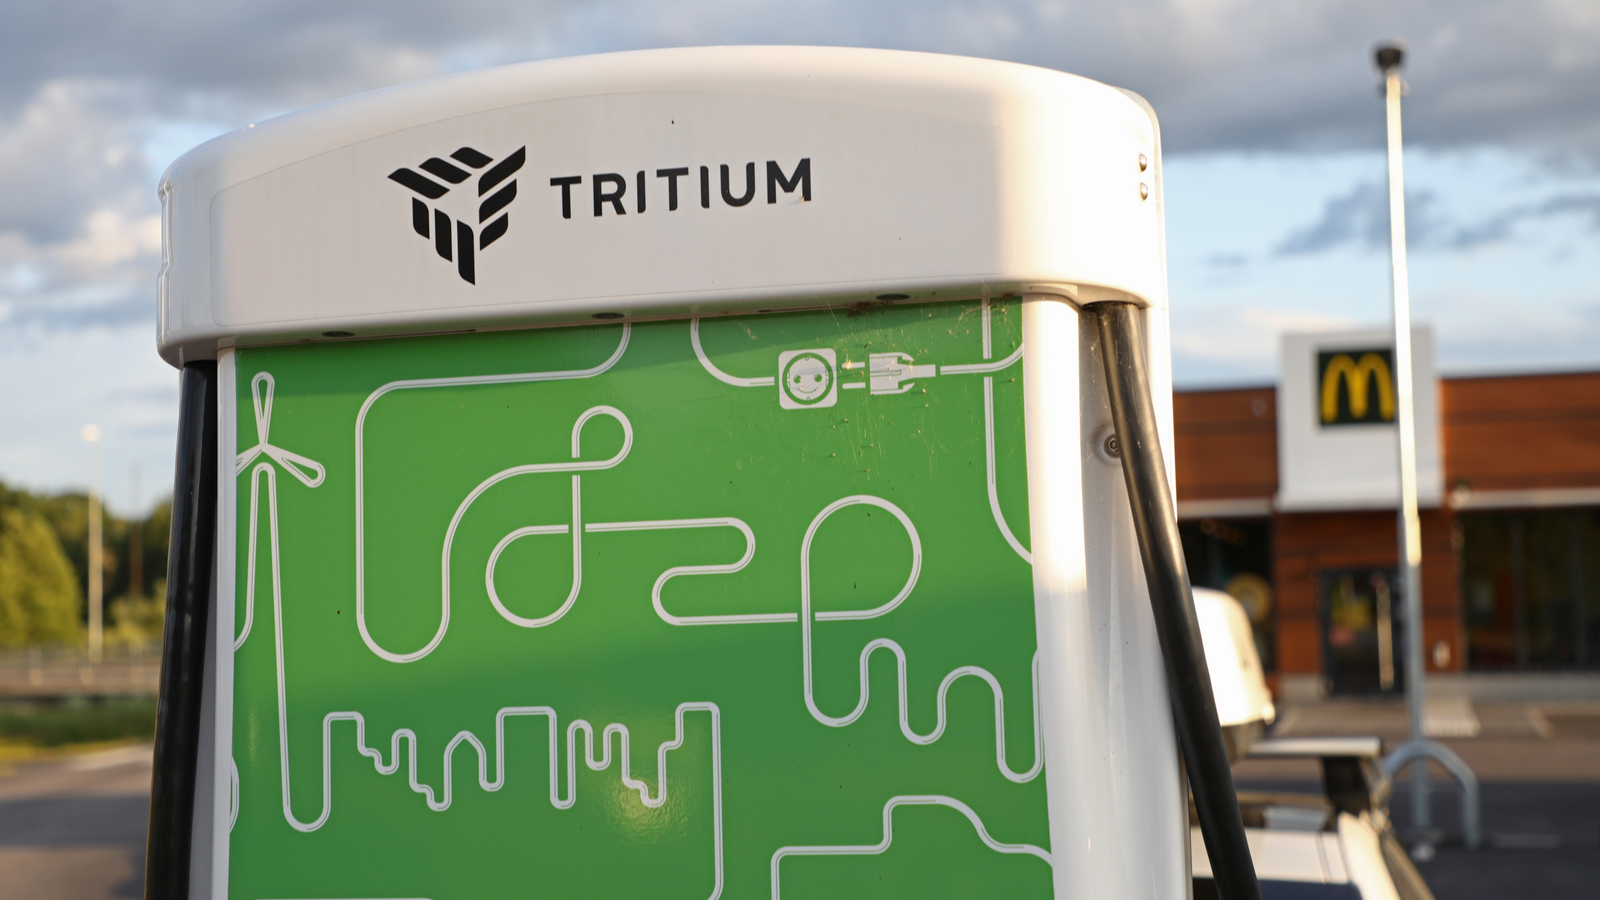 Tritium (DCFC Stock) charging, charging station for electric cars, in the parking lot at McDonald's.